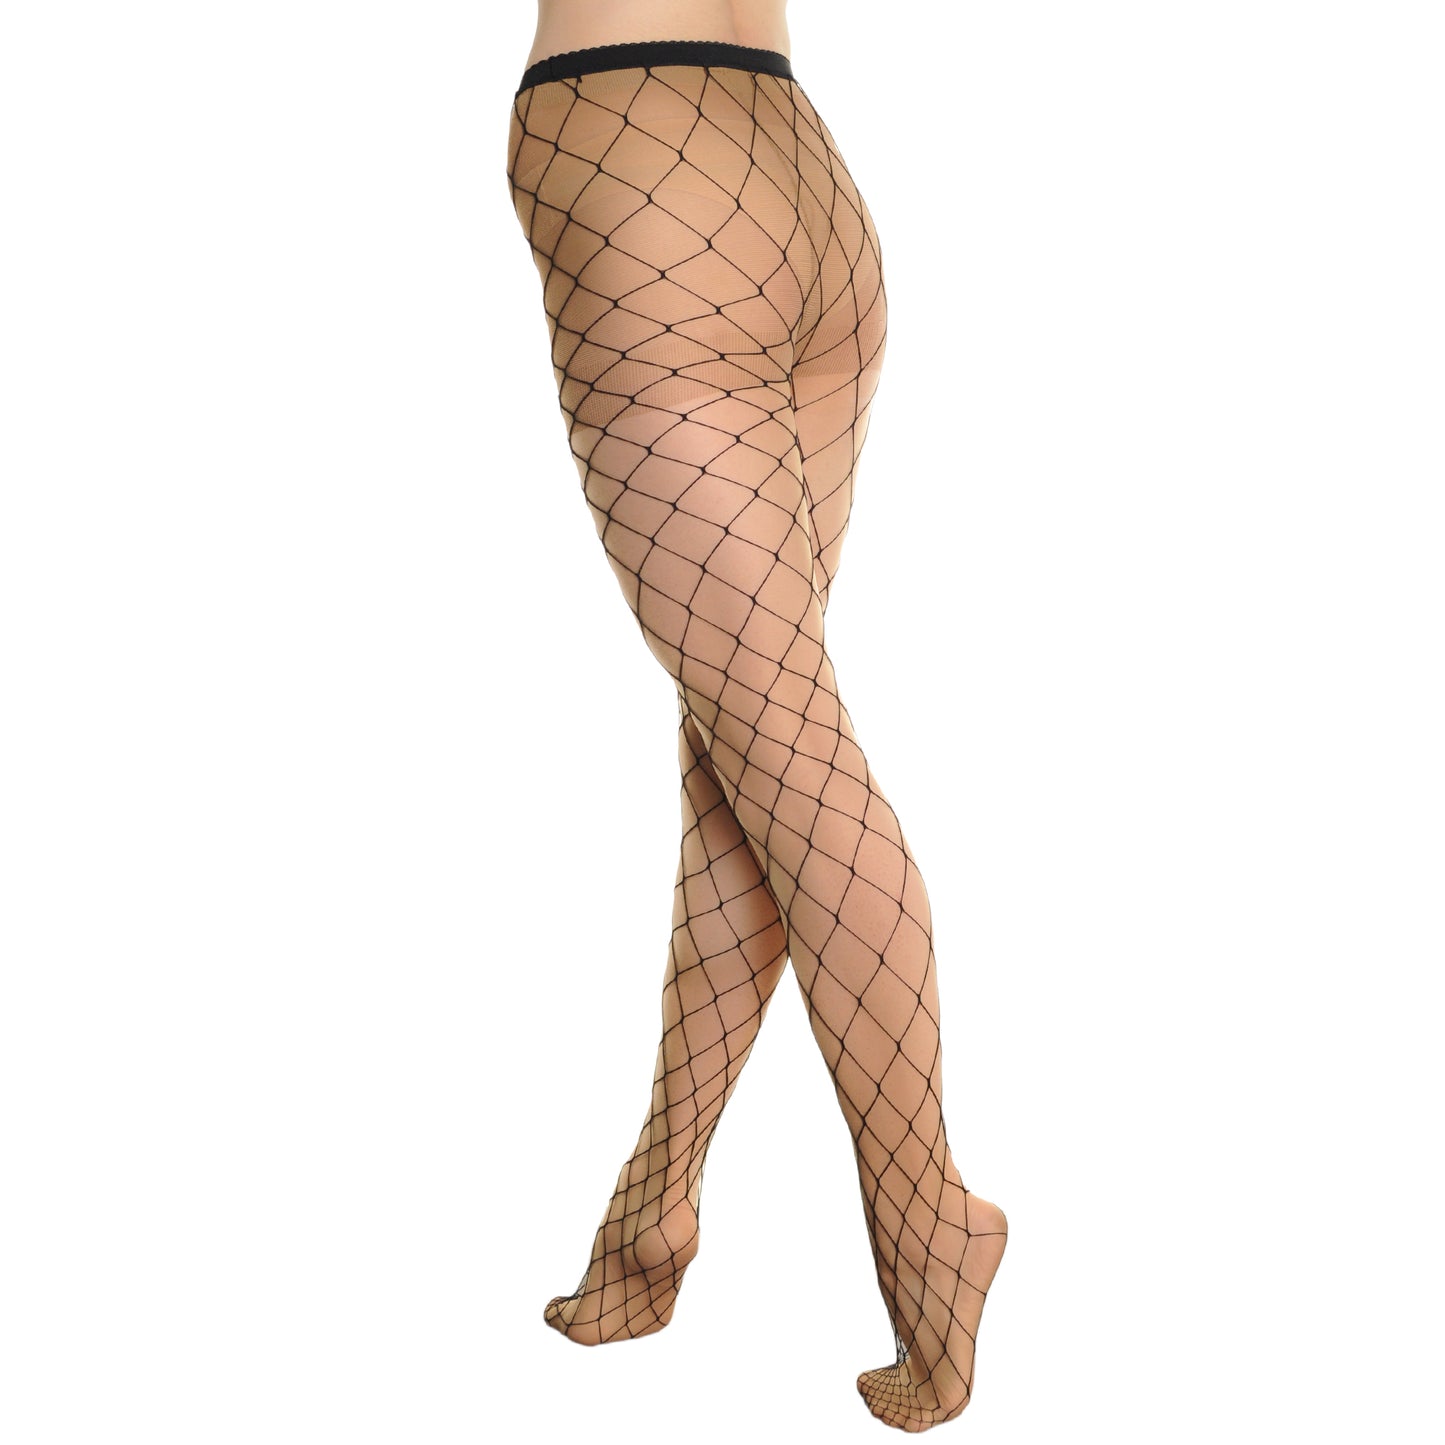 Industrial Net Pantyhose with Spandex (1-Pack)